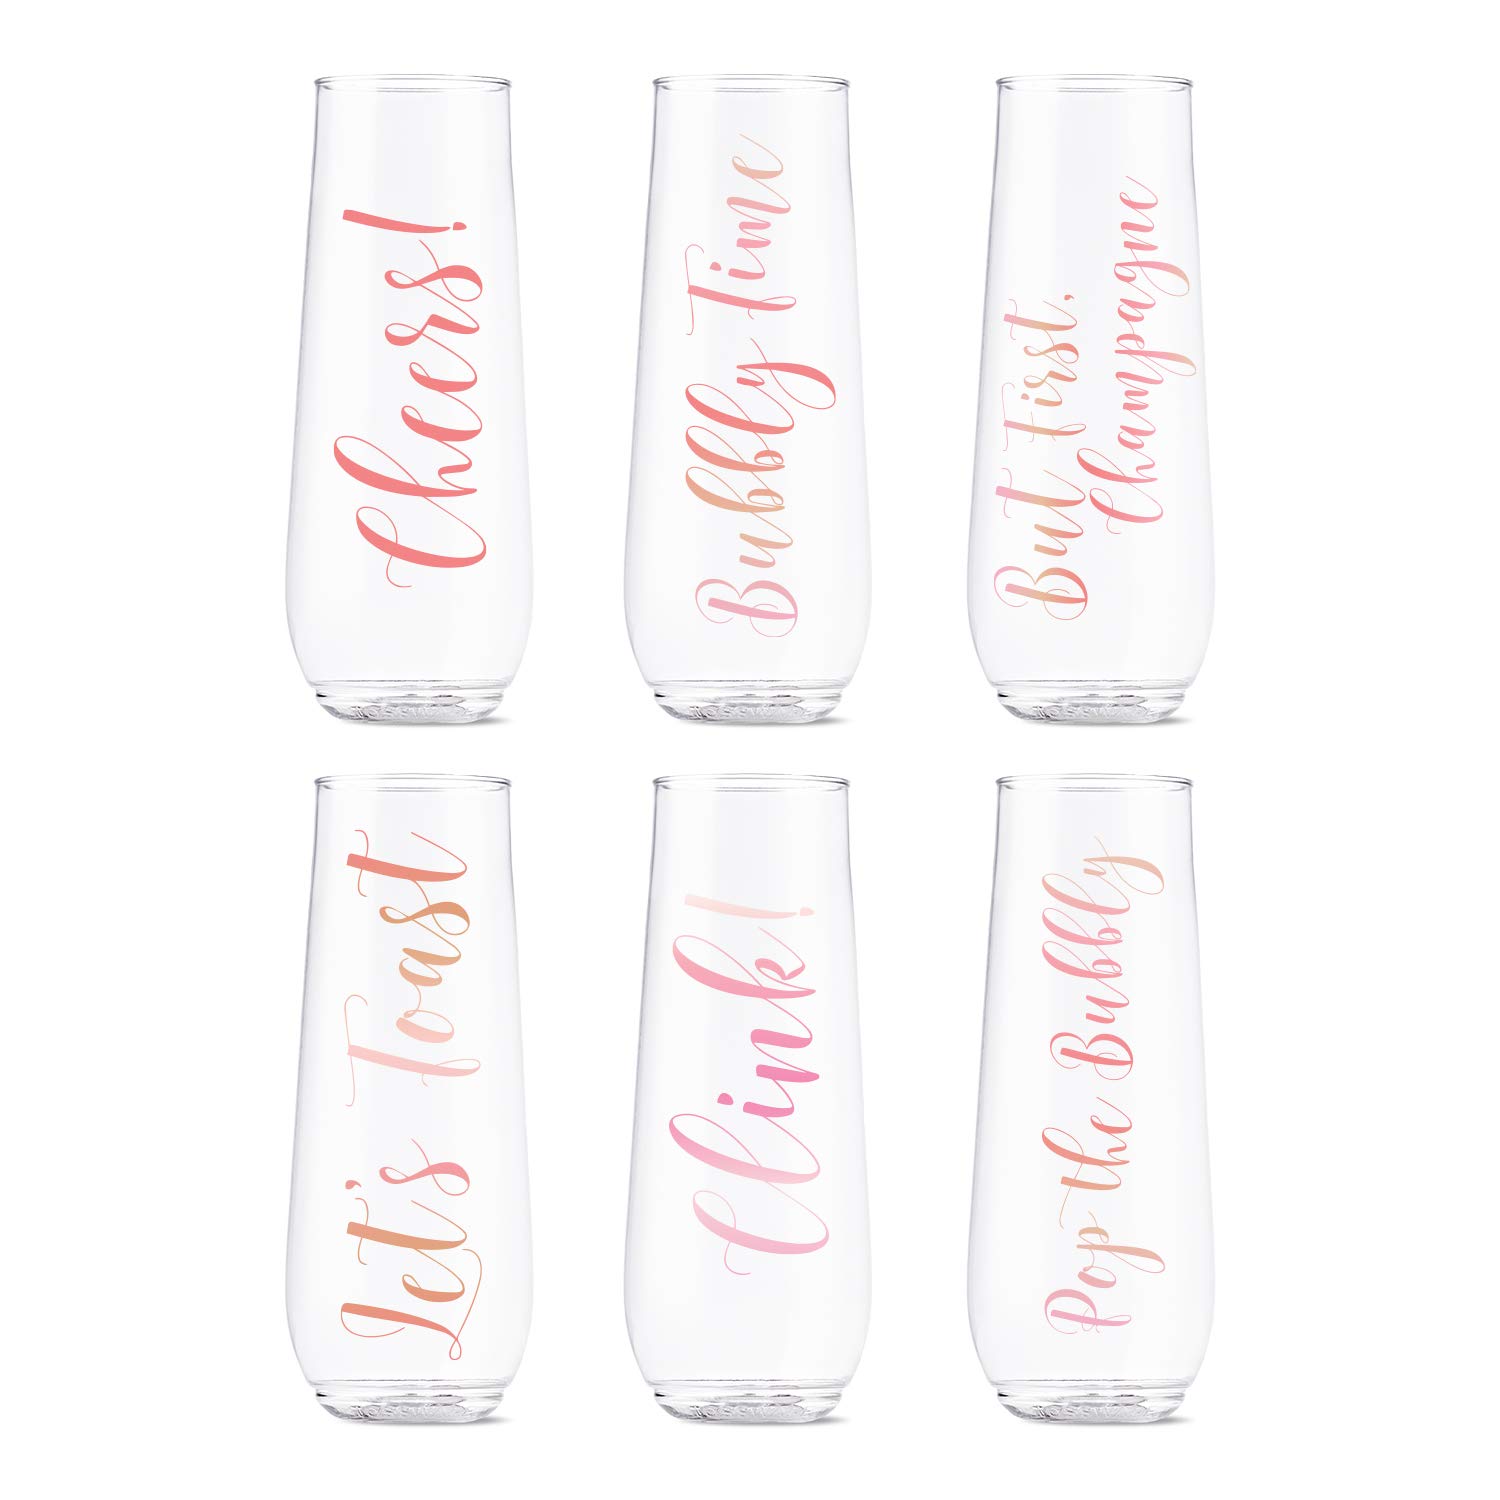 TOSSWARE POP 9oz Flute Pink Rose Toast Series, SET OF 6, Premium Quality, Recyclable, Unbreakable & Crystal Clear Plastic Printed Champagne Glasses